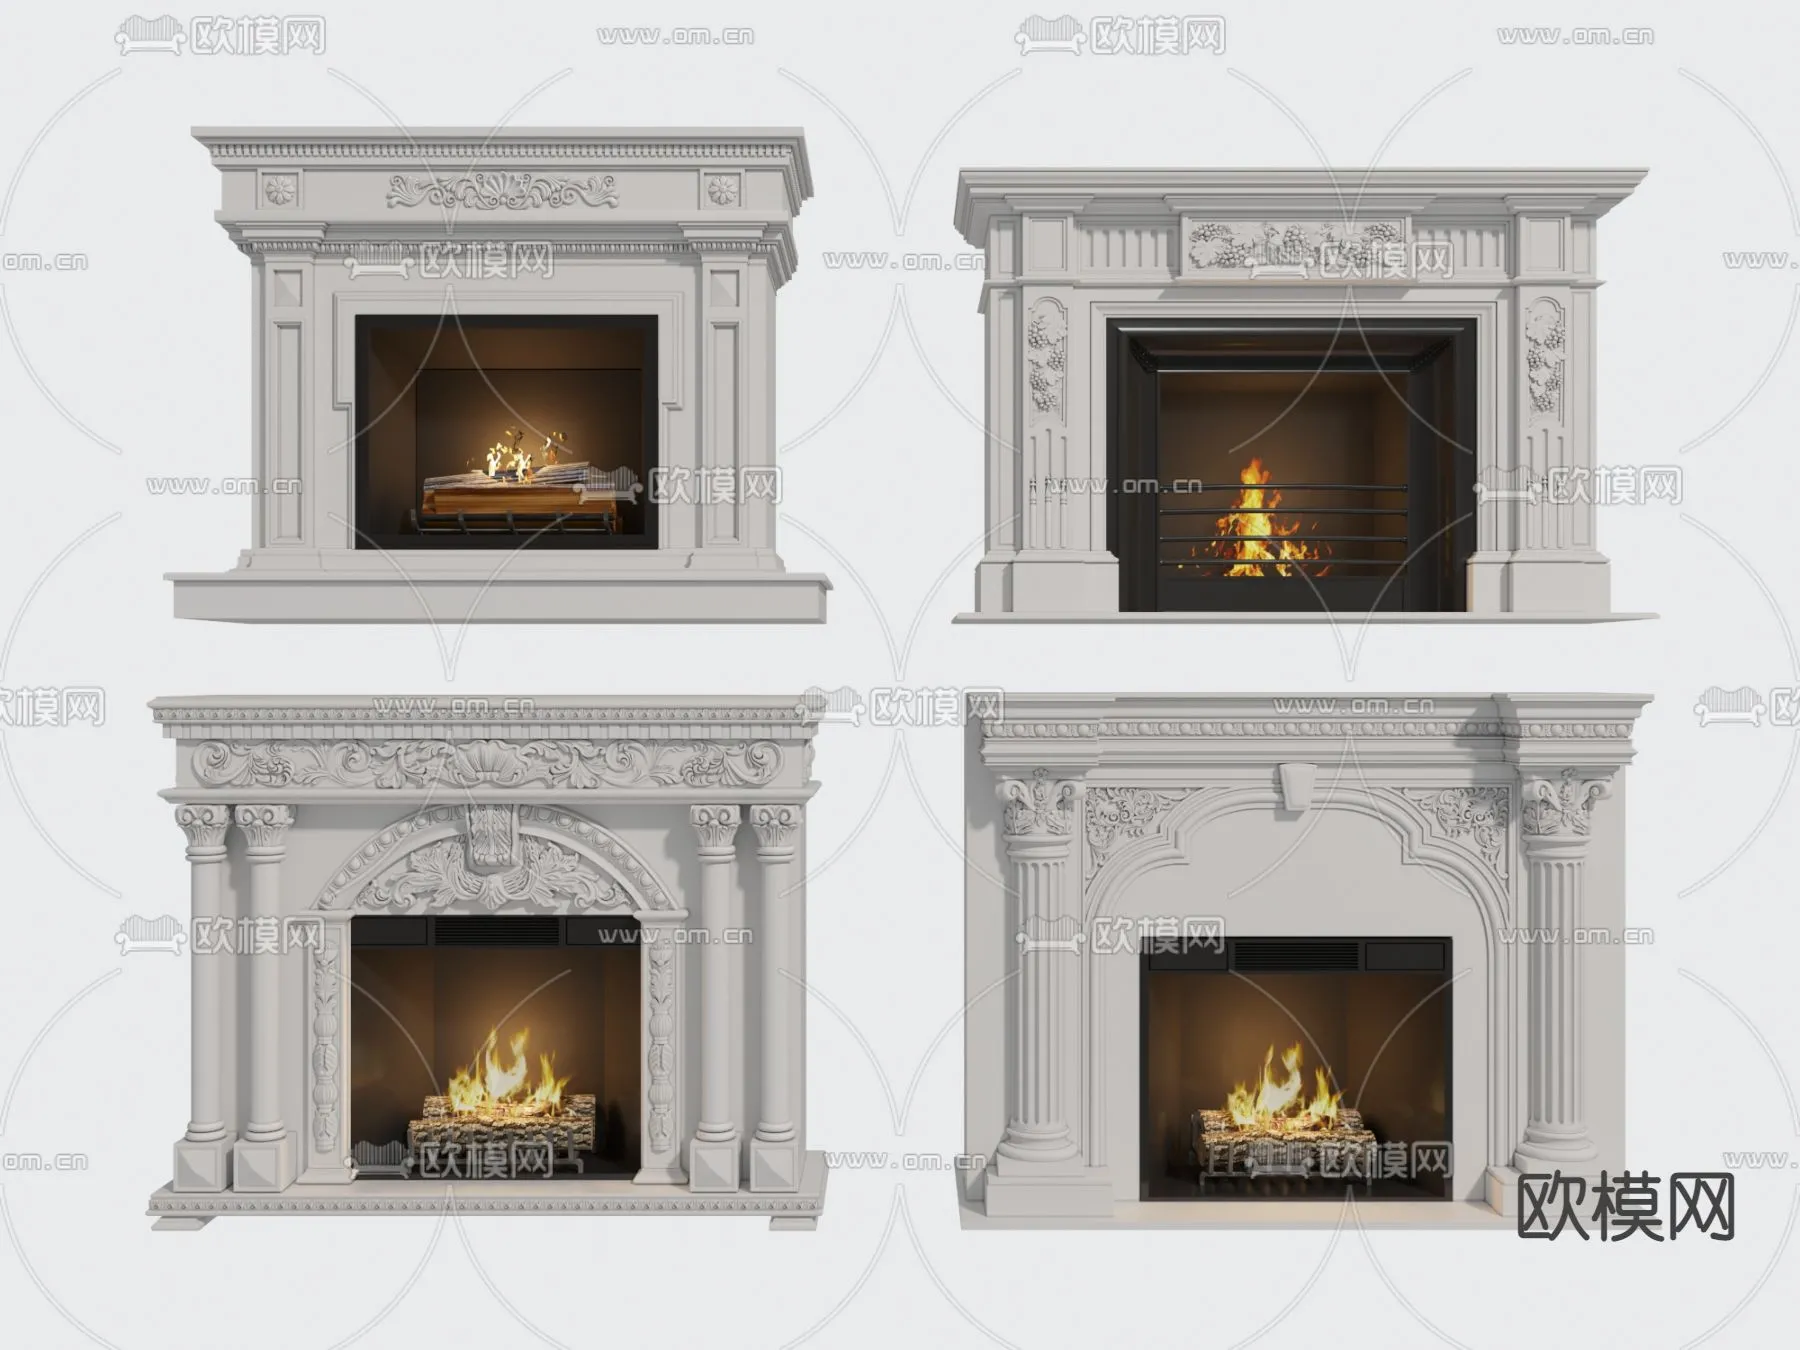 CLASSIC – FIREPLACE 3DMODELS – 077